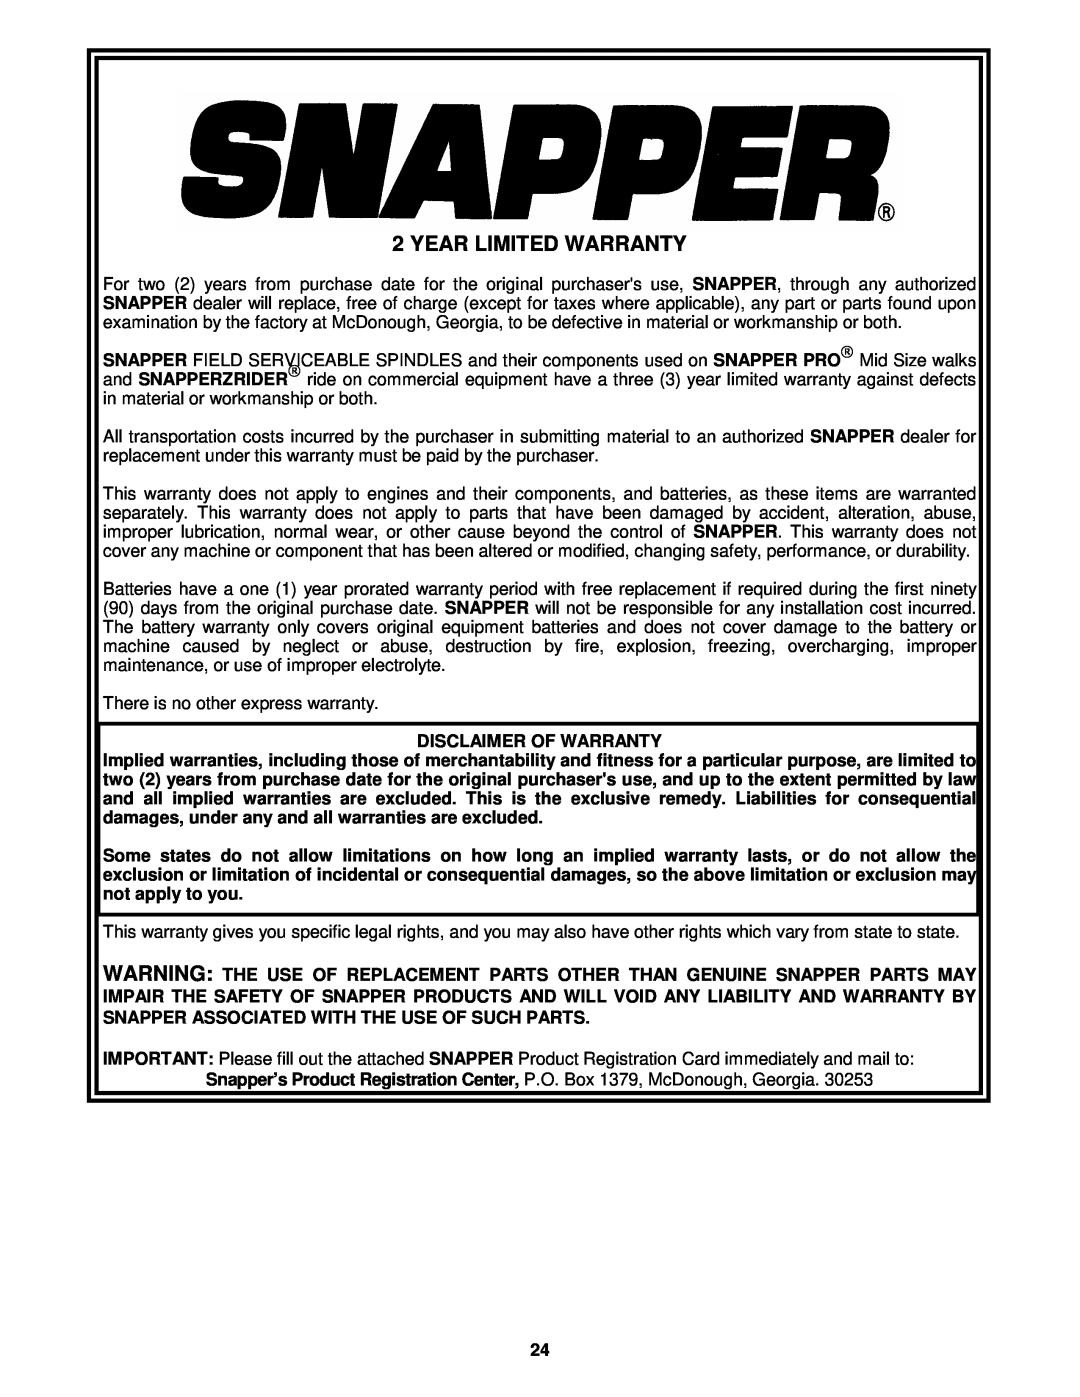 Snapper ZM2500K, ZM2200K, ZM2200KU, ZM2500KH, MZM2200KH ZM522M, ZM6100M important safety instructions Year Limited Warranty 